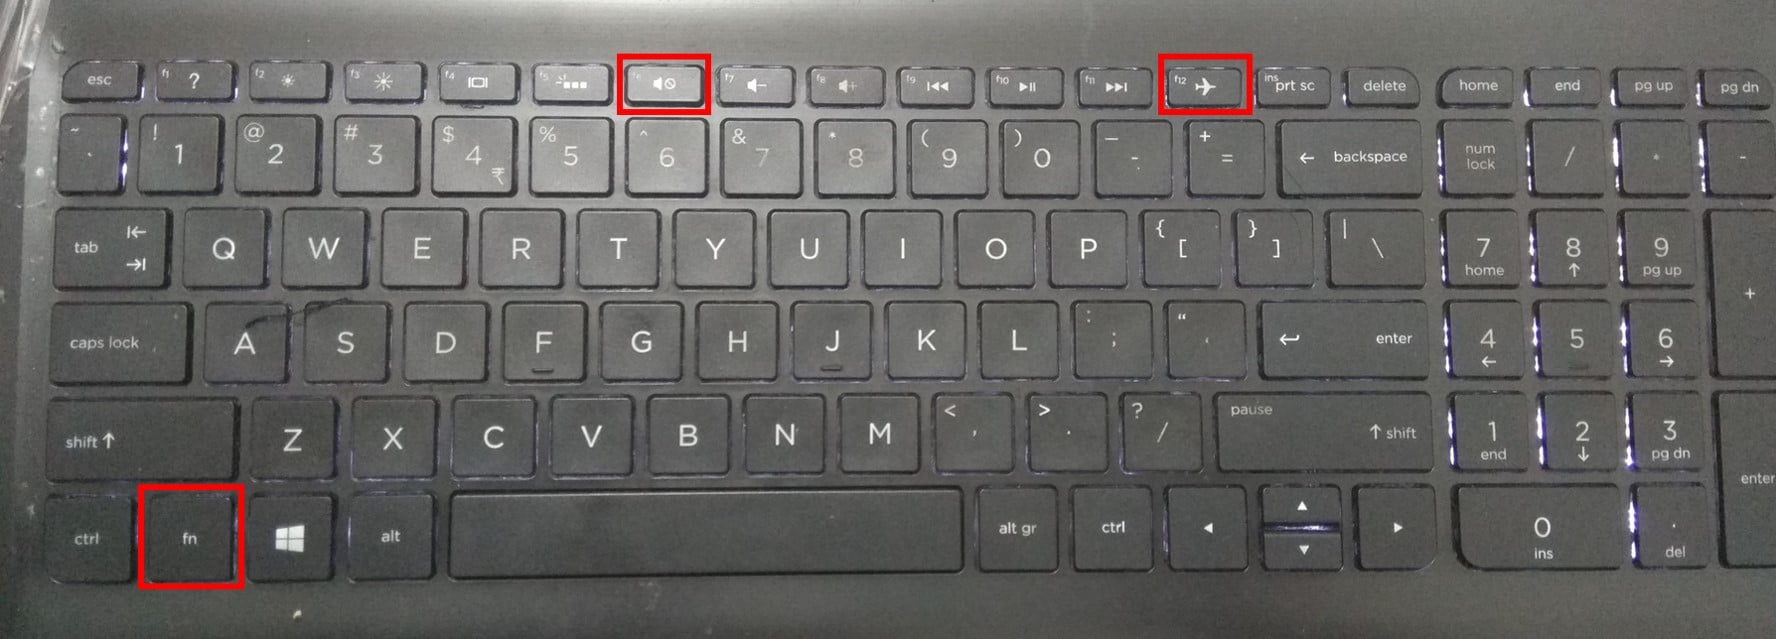 How to Use Fn Key With Action / Function Keys in Windows ...